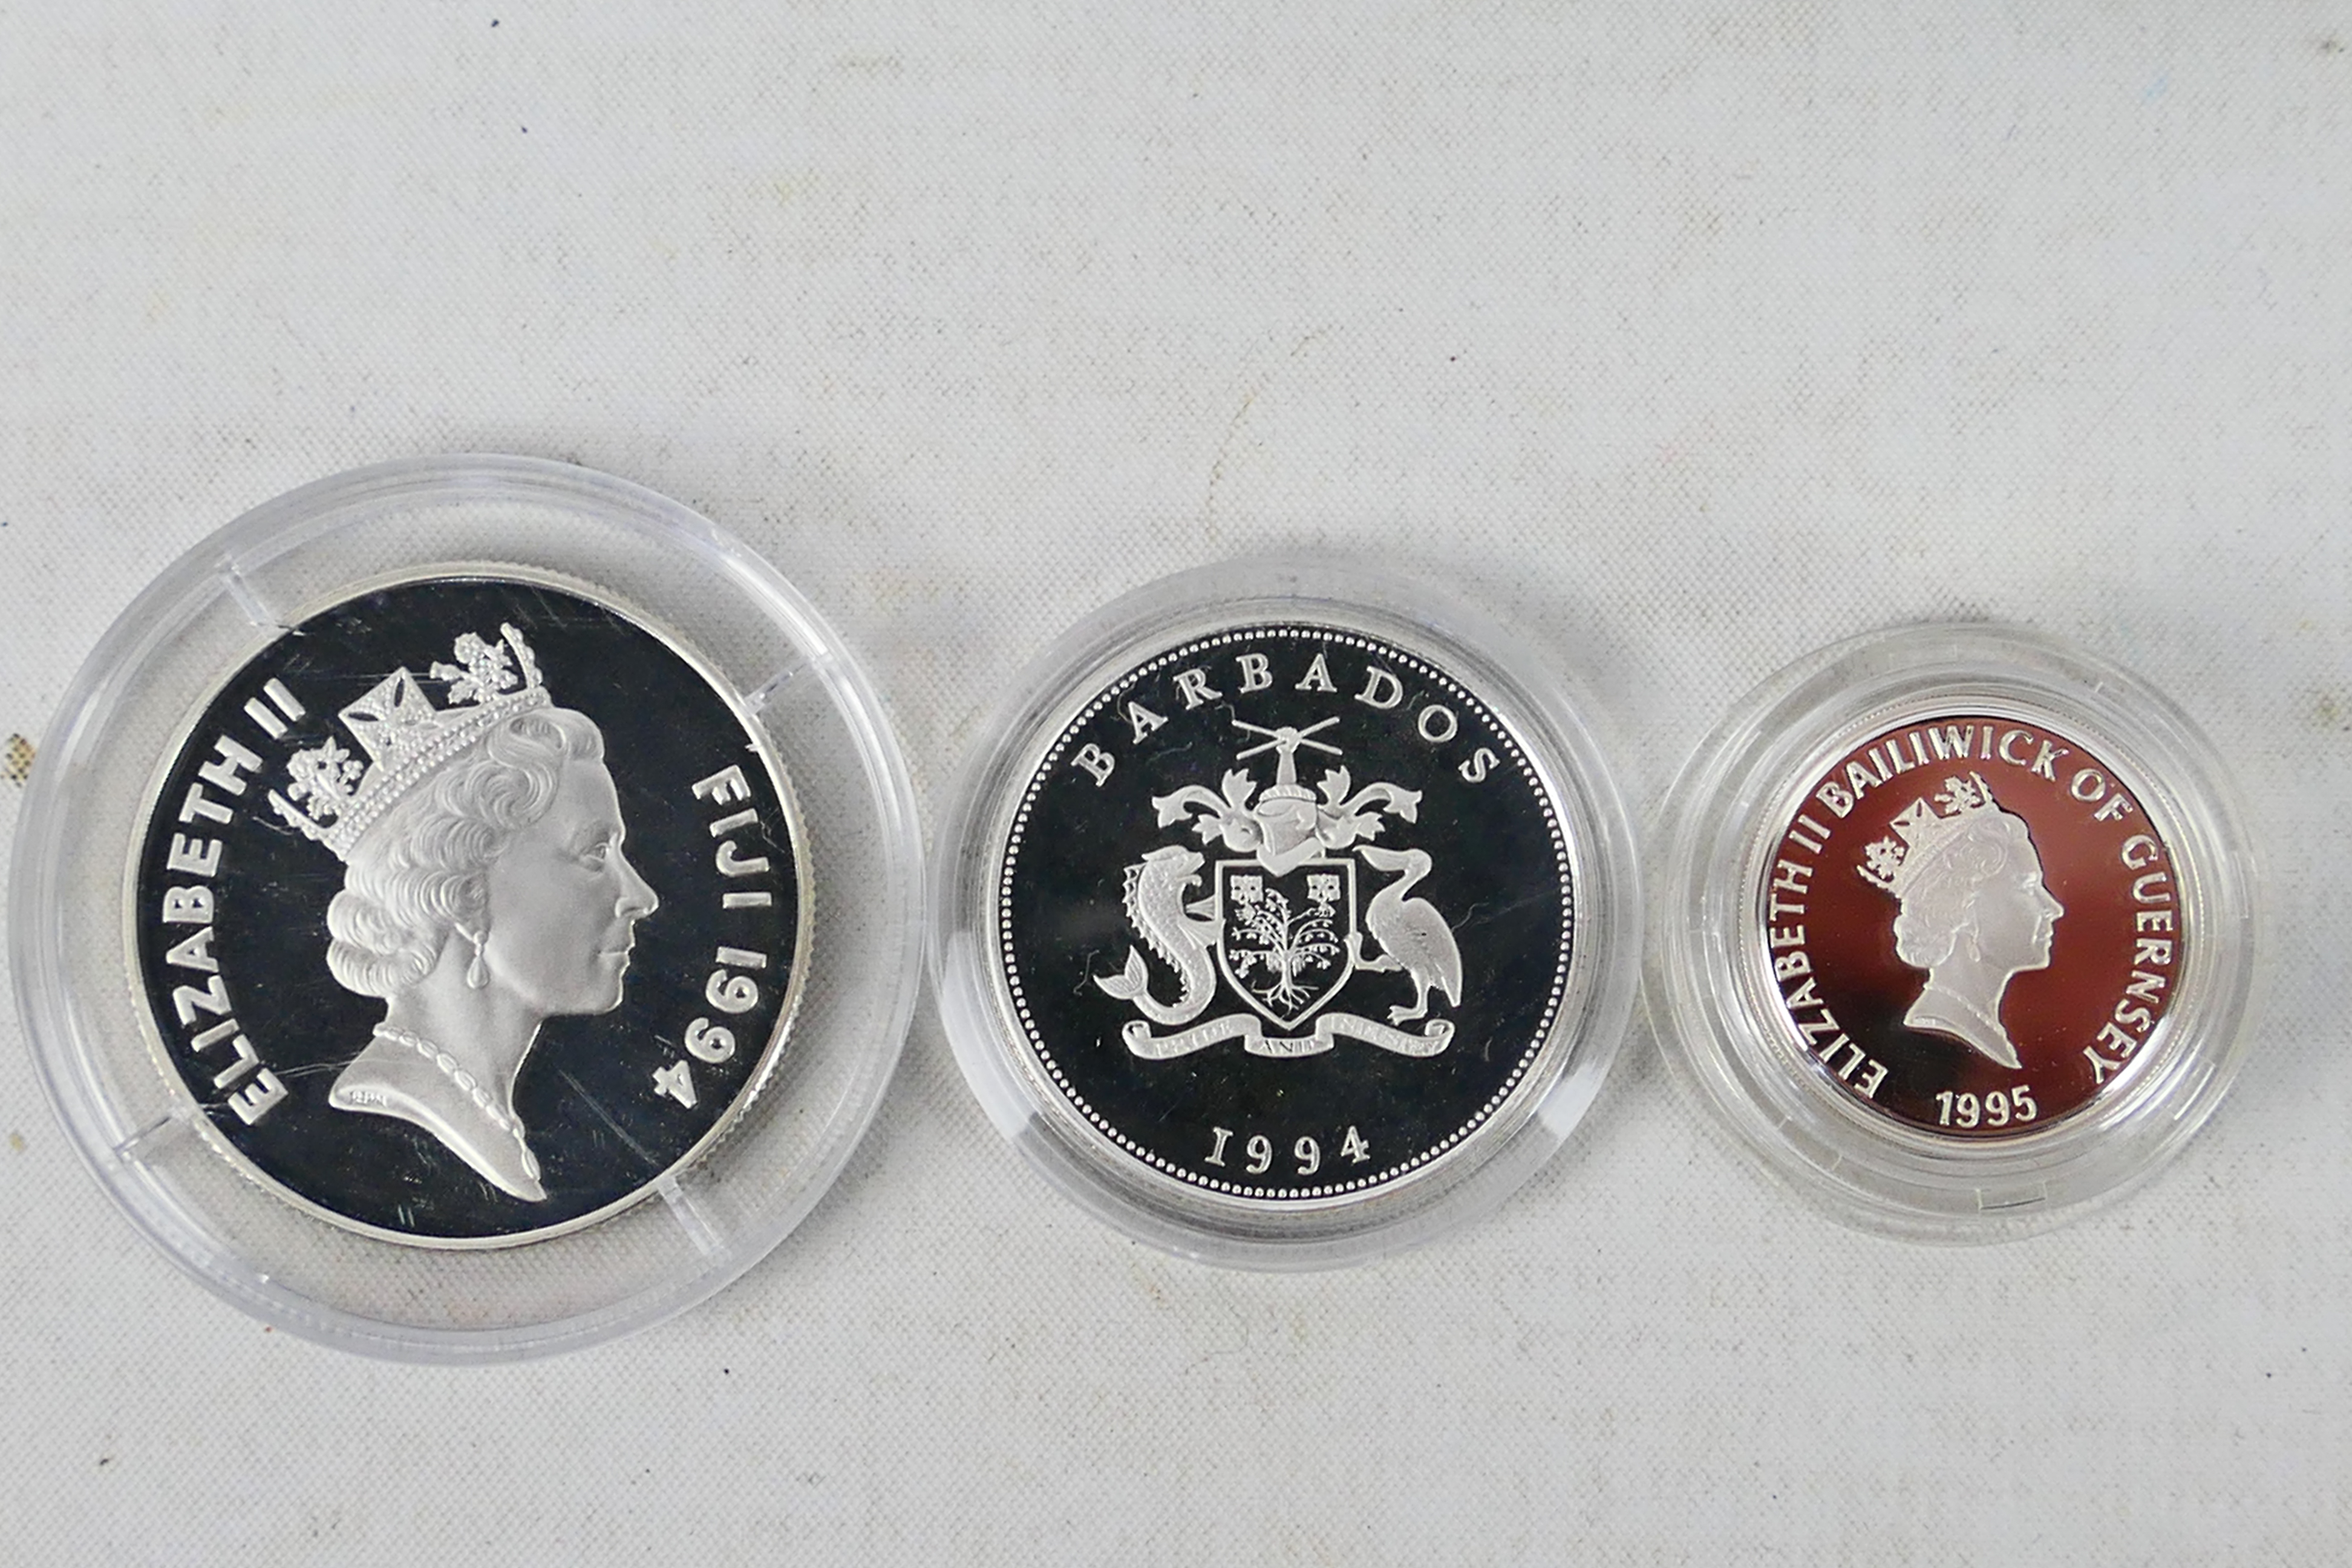 A Royal Mint 1995 silver proof £2 coin, - Image 6 of 6